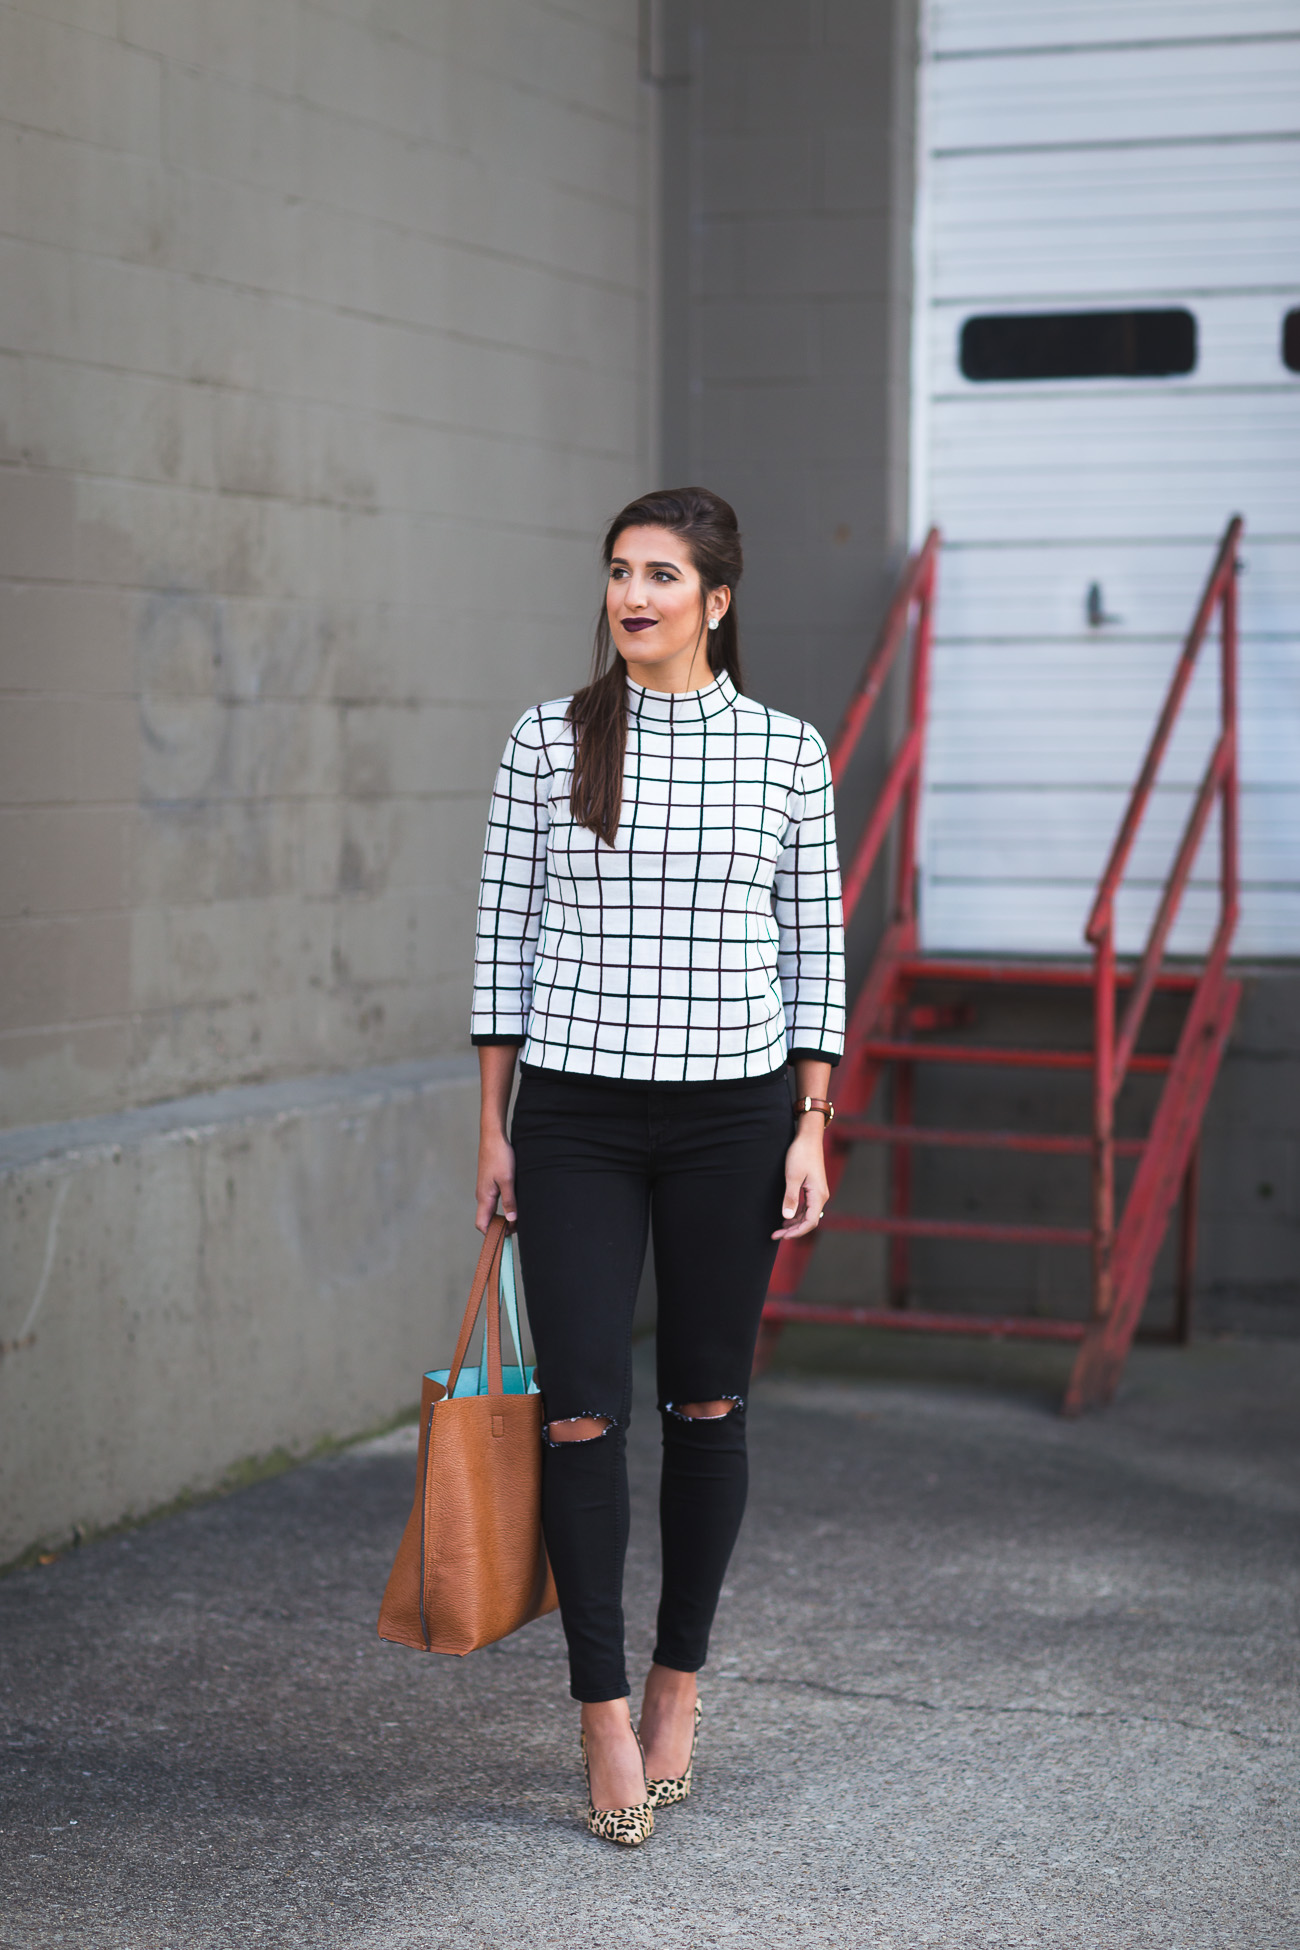 cute fall outfit, fall outfit ideas, fall fashion, fall style, windowpane print, windowpane sweater, nordstrom sweater, halogen sweater, dark lipstick, calf hair pumps, leopard pumps, distressed skinny jeans, vegan tote, fall outfit ideas // grace wainwright from a southern drawl